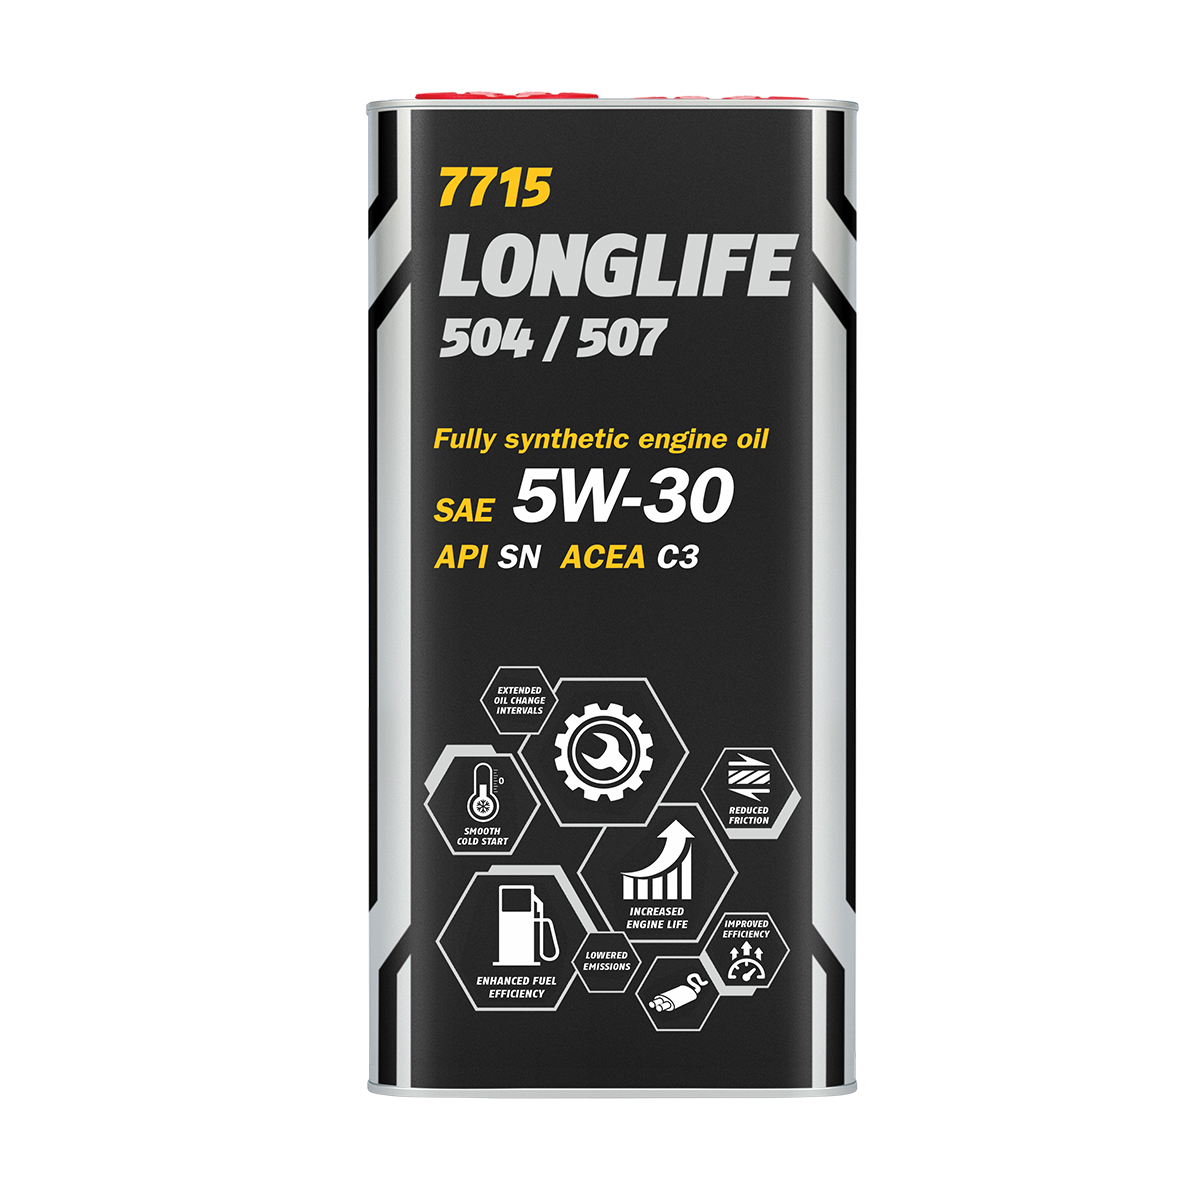 6L Mannol Longlife 504/507 5W-30 Fully Synthetic Engine Oil on OnBuy